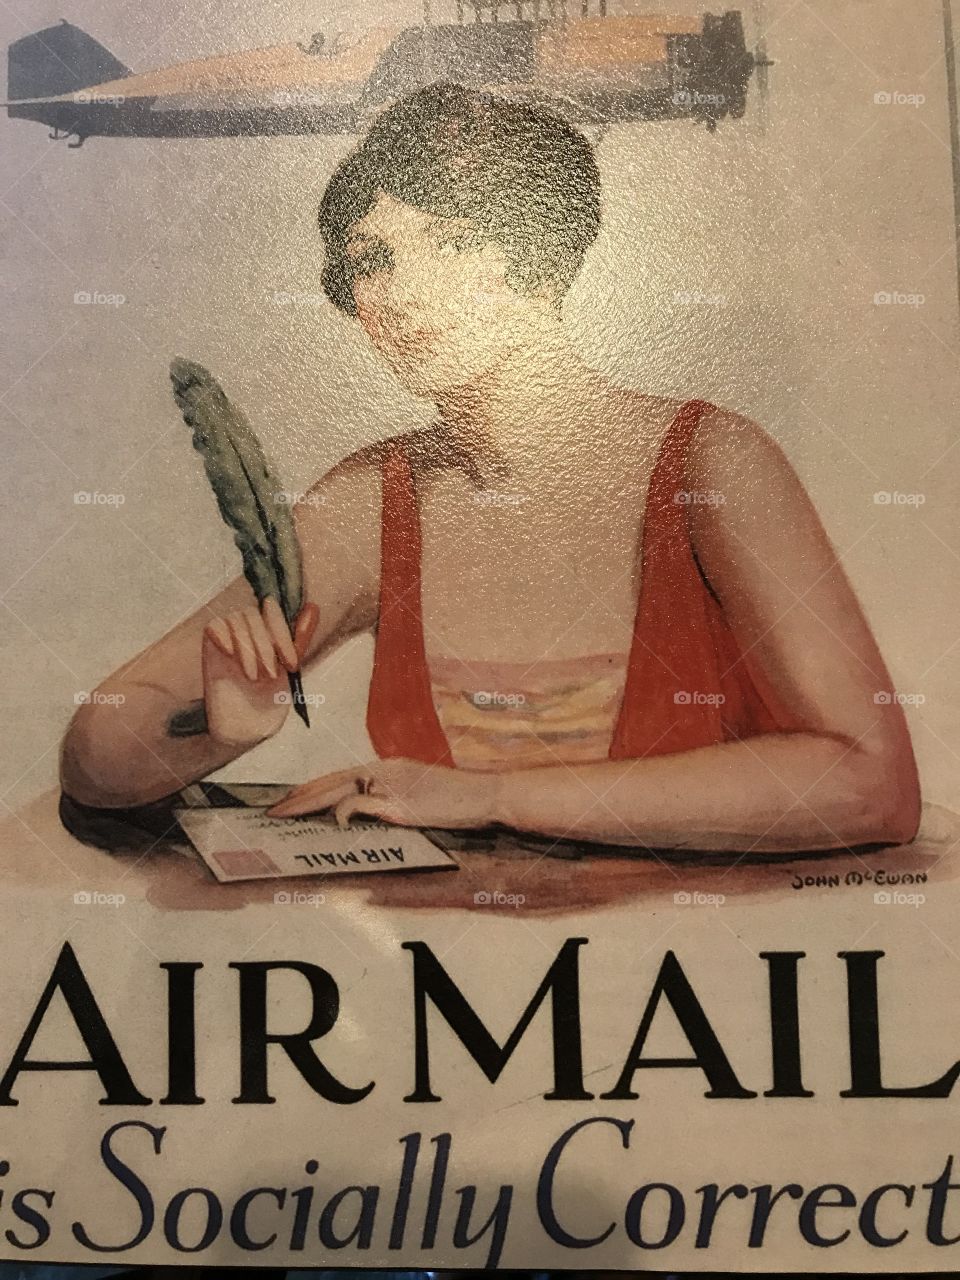 Vintage airmail is socially correct